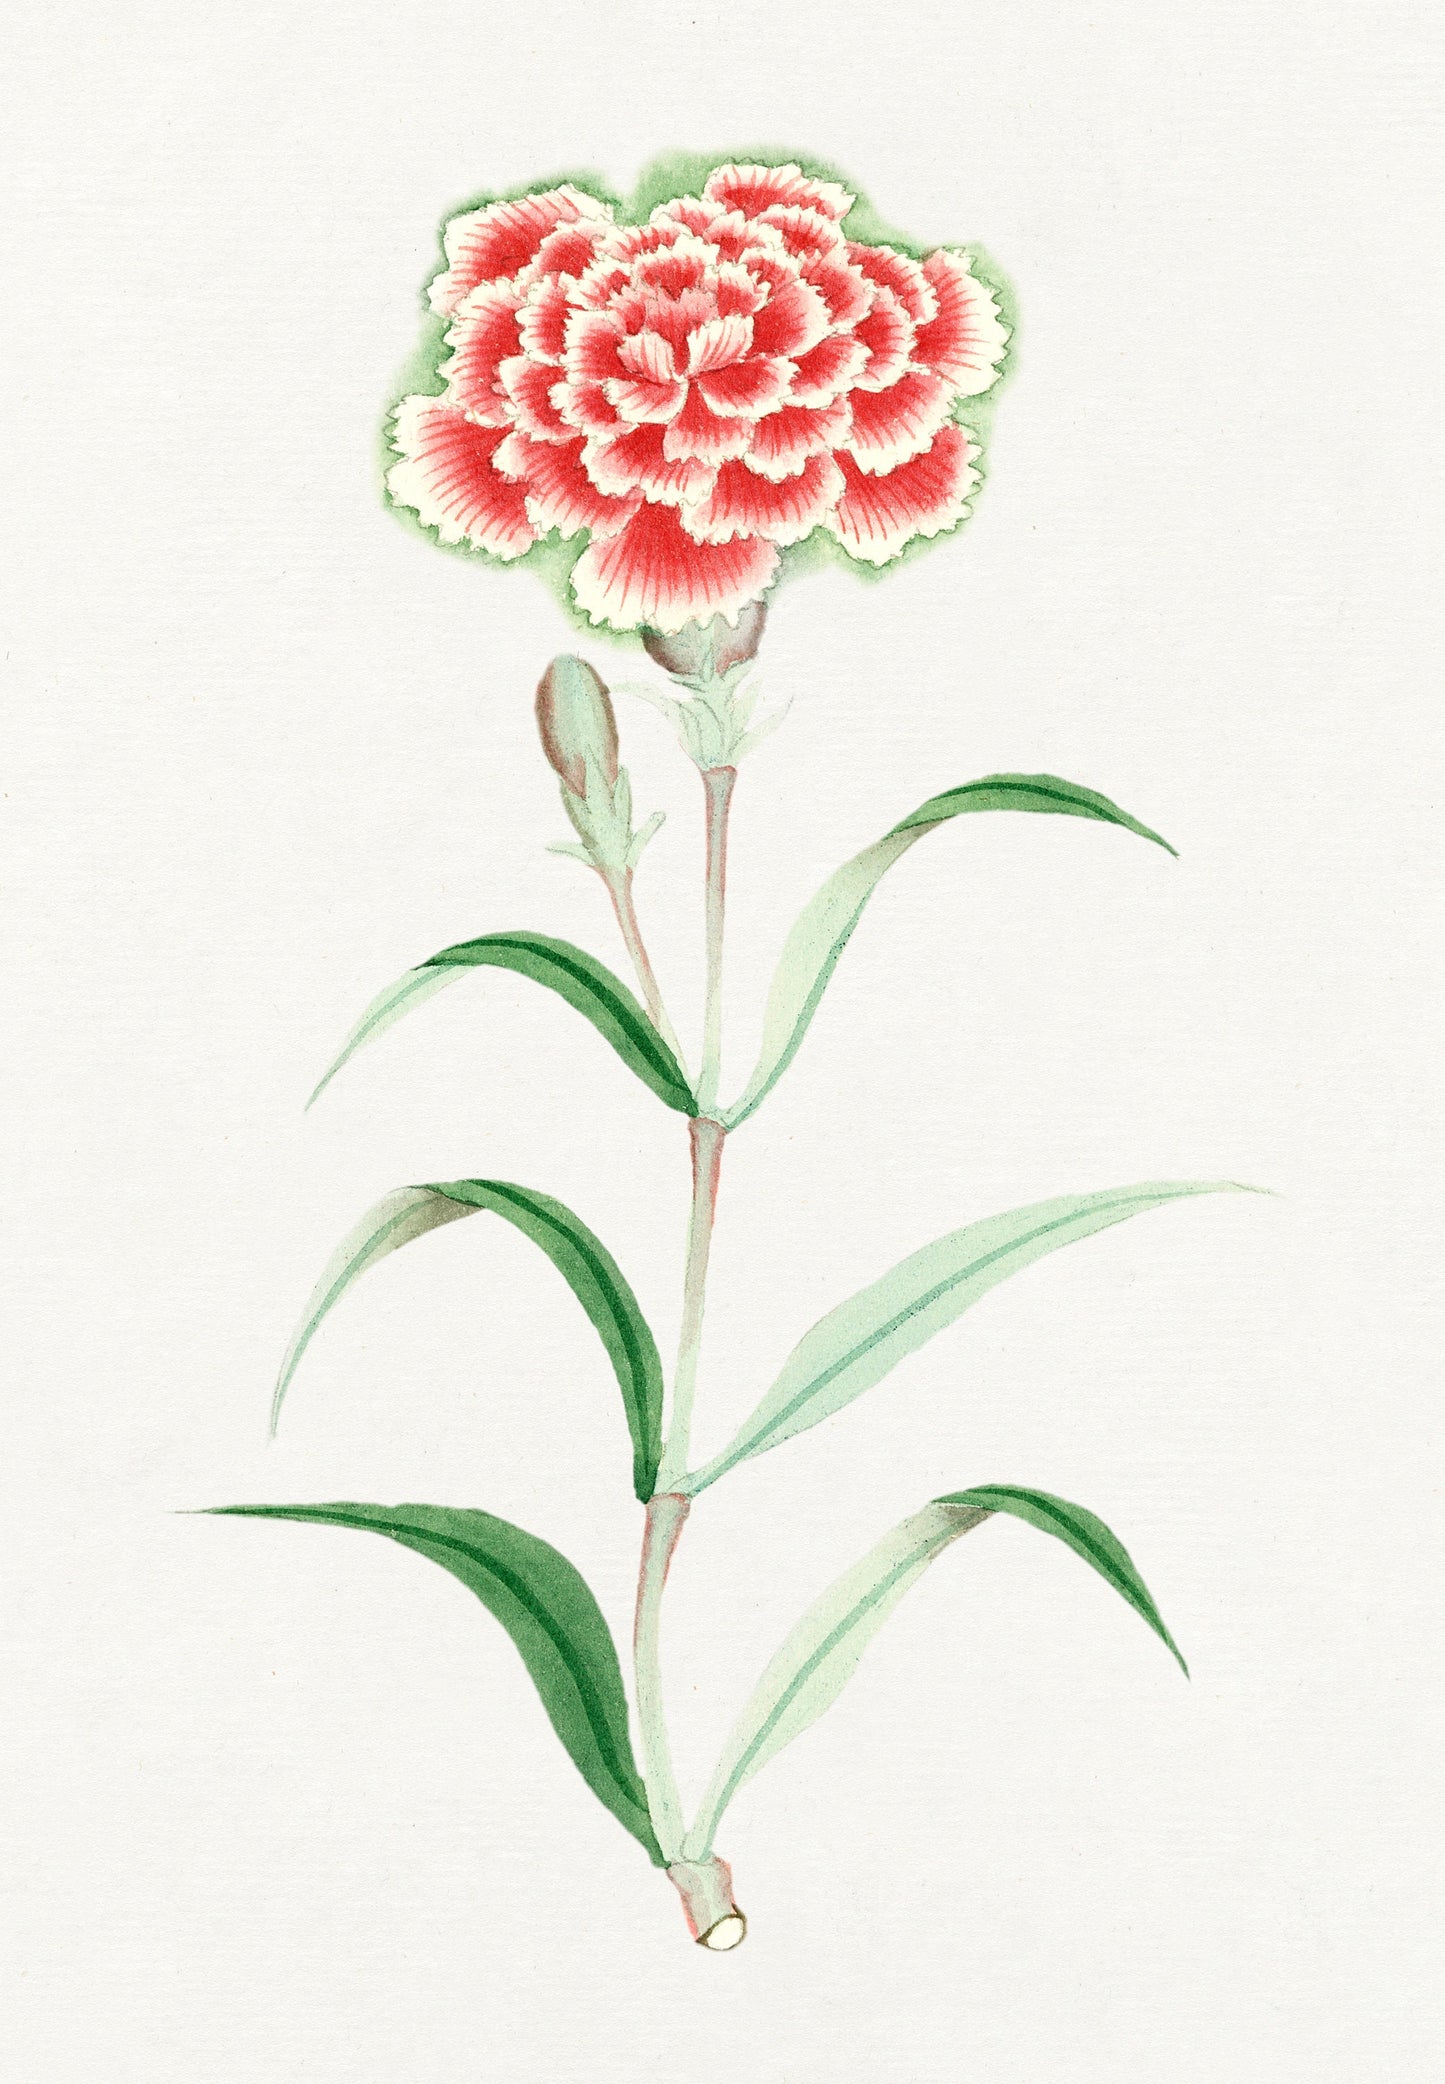 Japanese Floral Painting Artworks [18 Images]